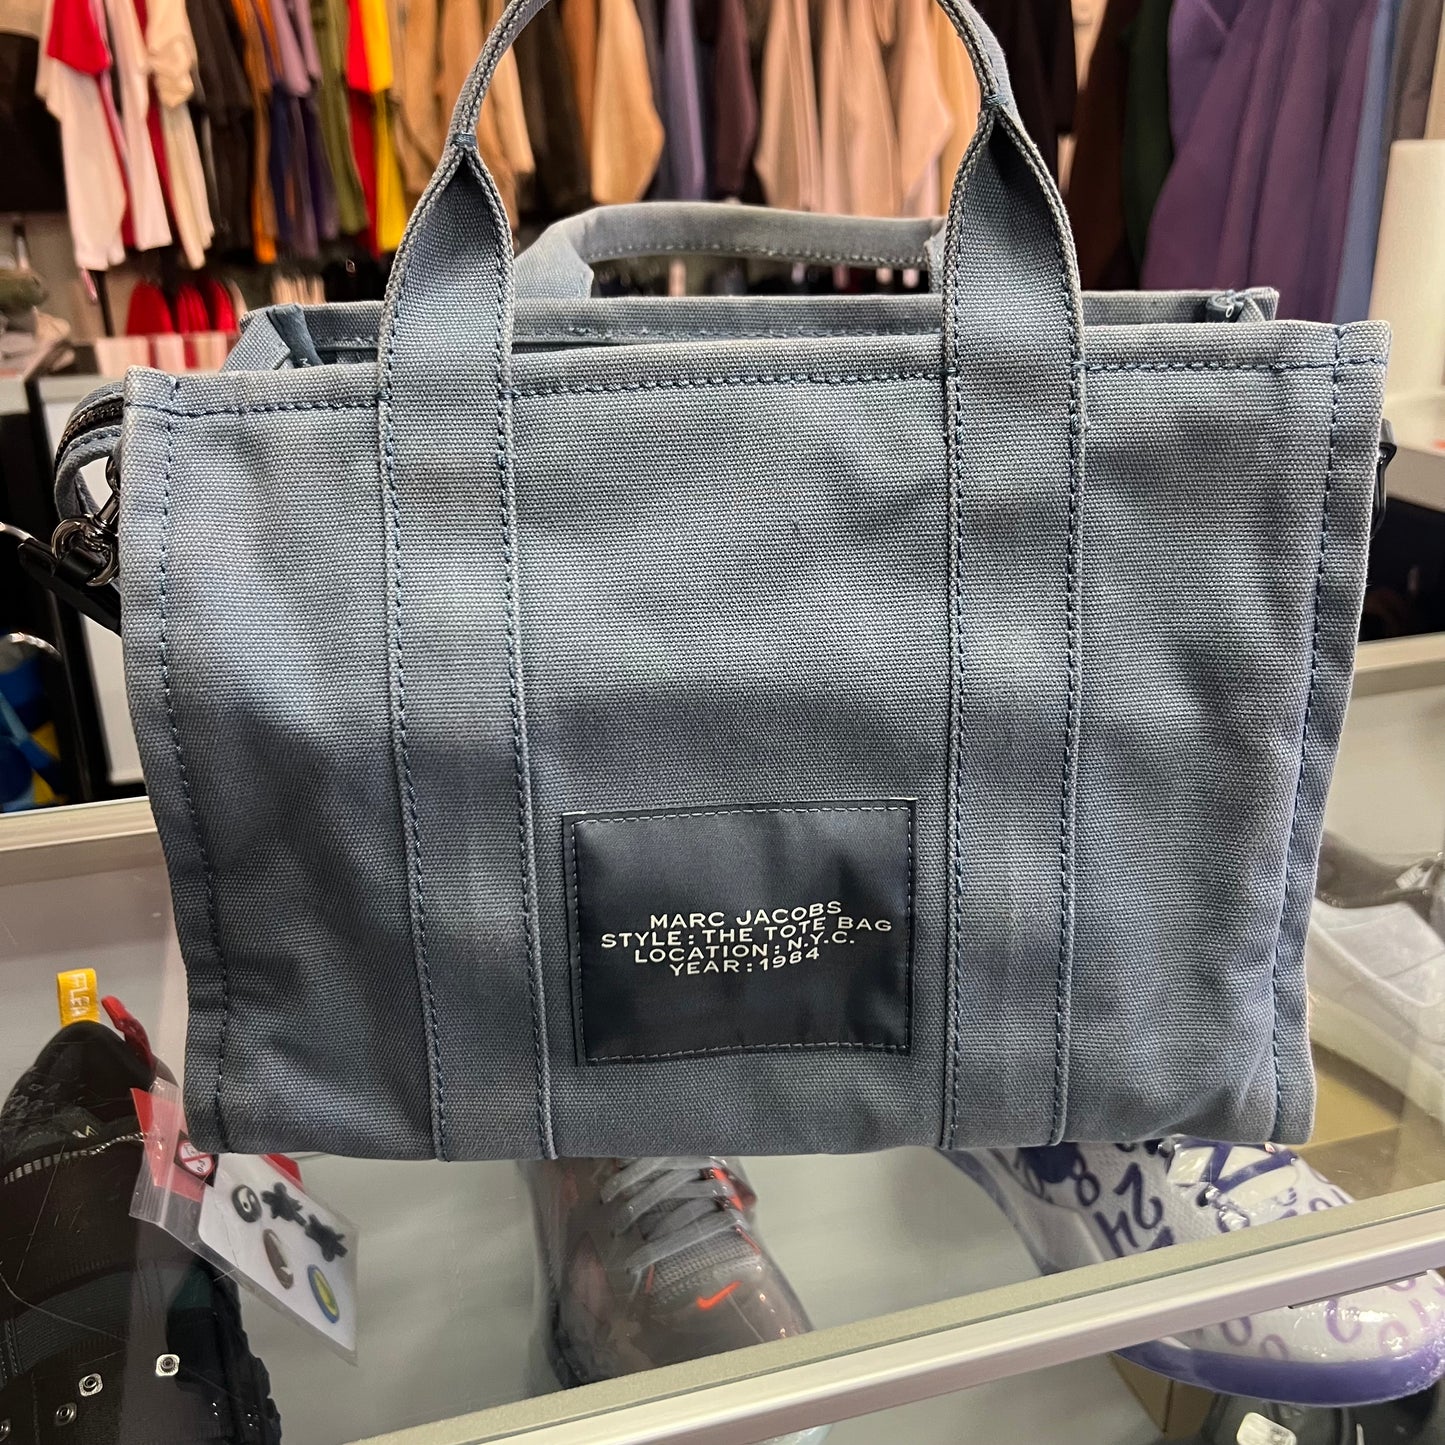 Marc Jacobs The Tote Bag Small Blue Shadow - Preowned